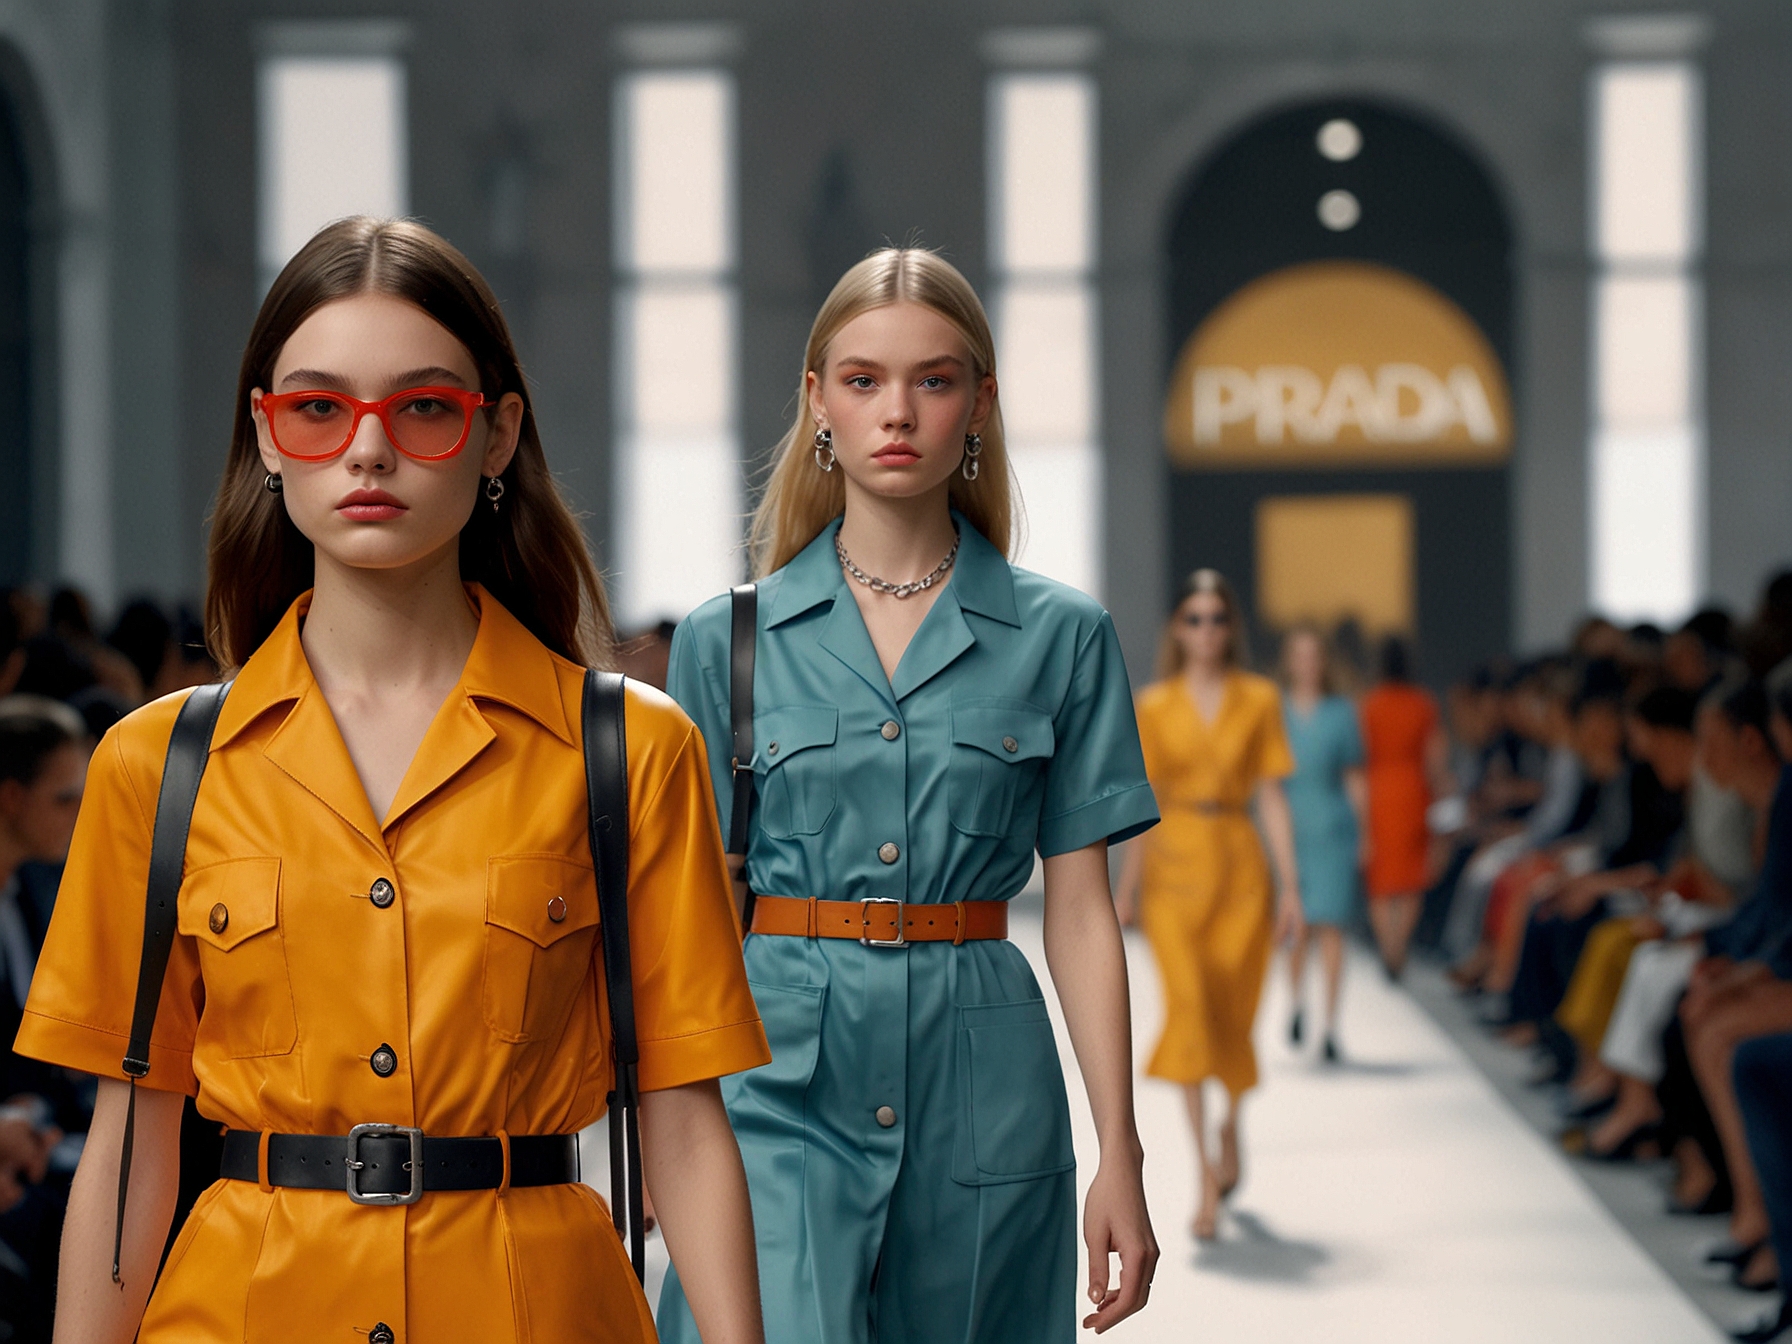 Models at Milan Fashion Week representing Prada's theme of youthful optimism, walking down the runway in cutting-edge outfits.